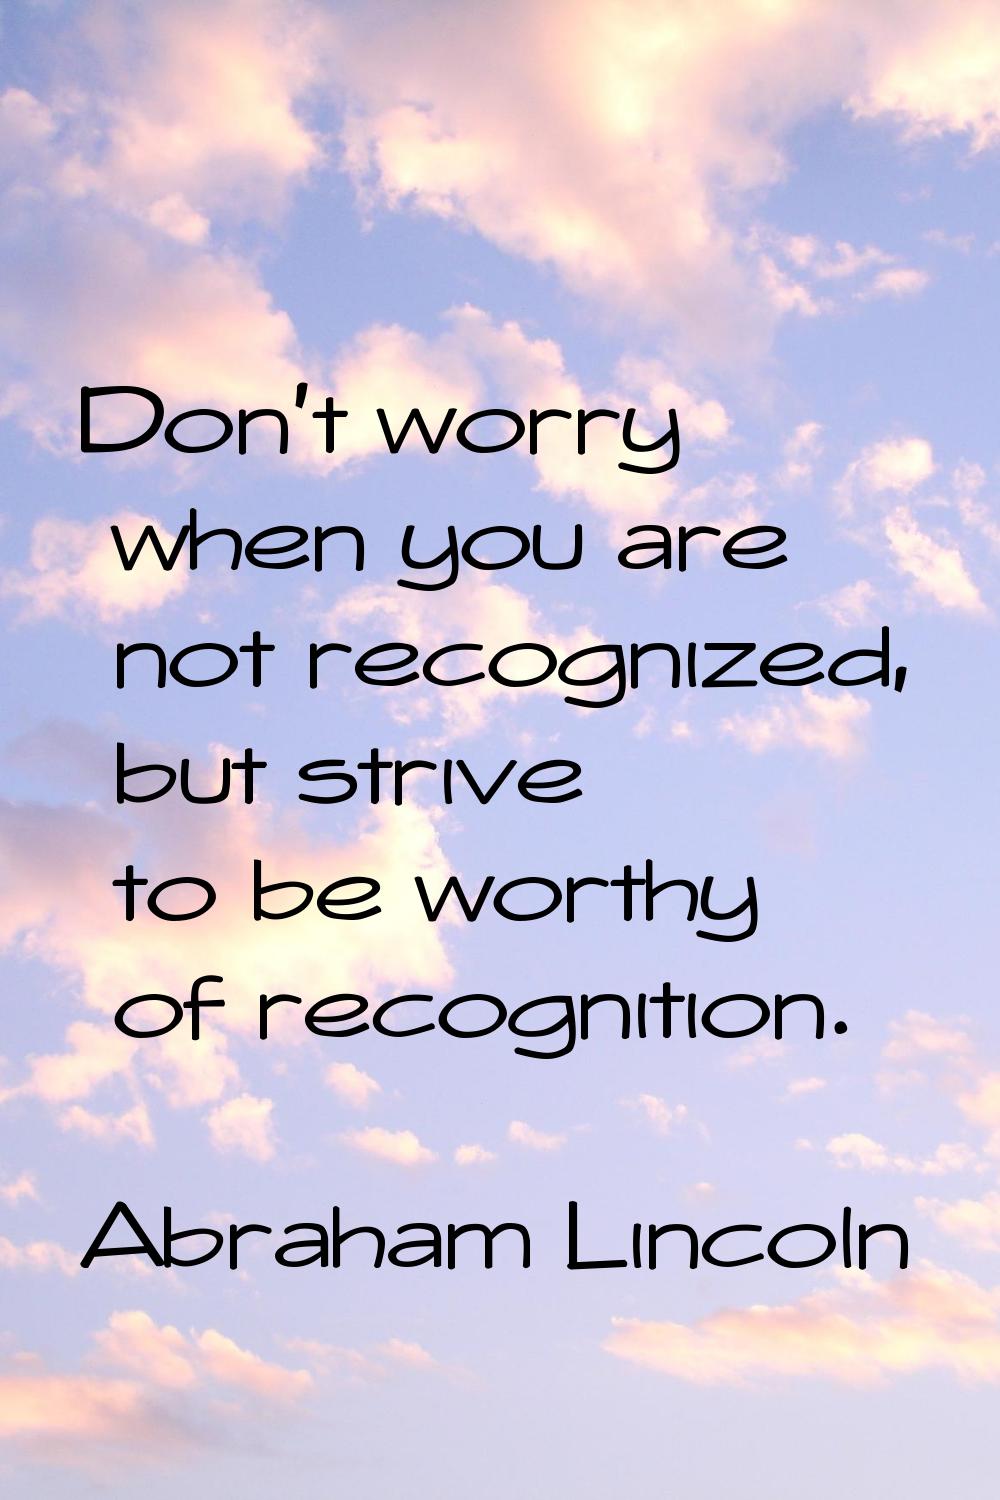 Don't worry when you are not recognized, but strive to be worthy of recognition.